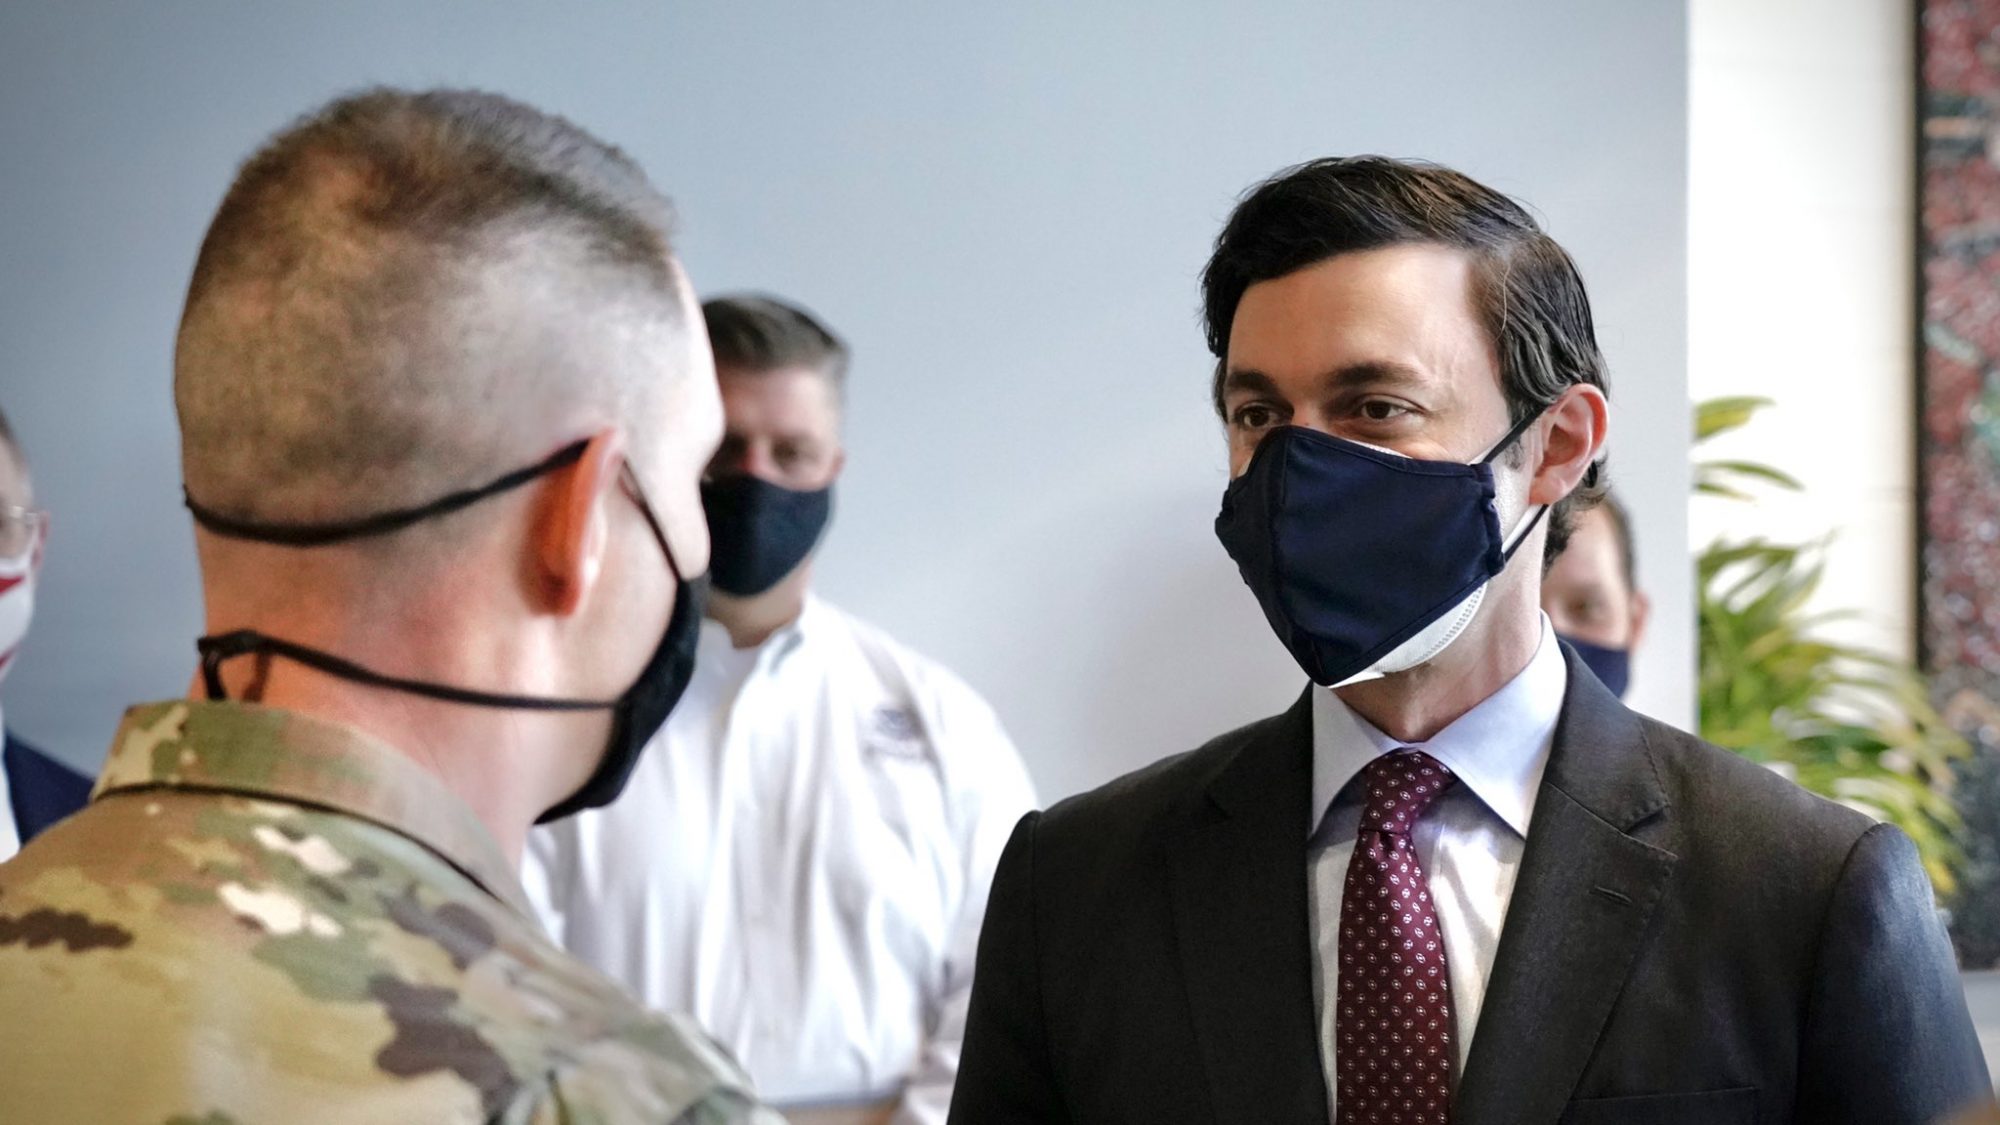 Sen. Jon Ossoff, wearing a black face mask, meets with a member of the military